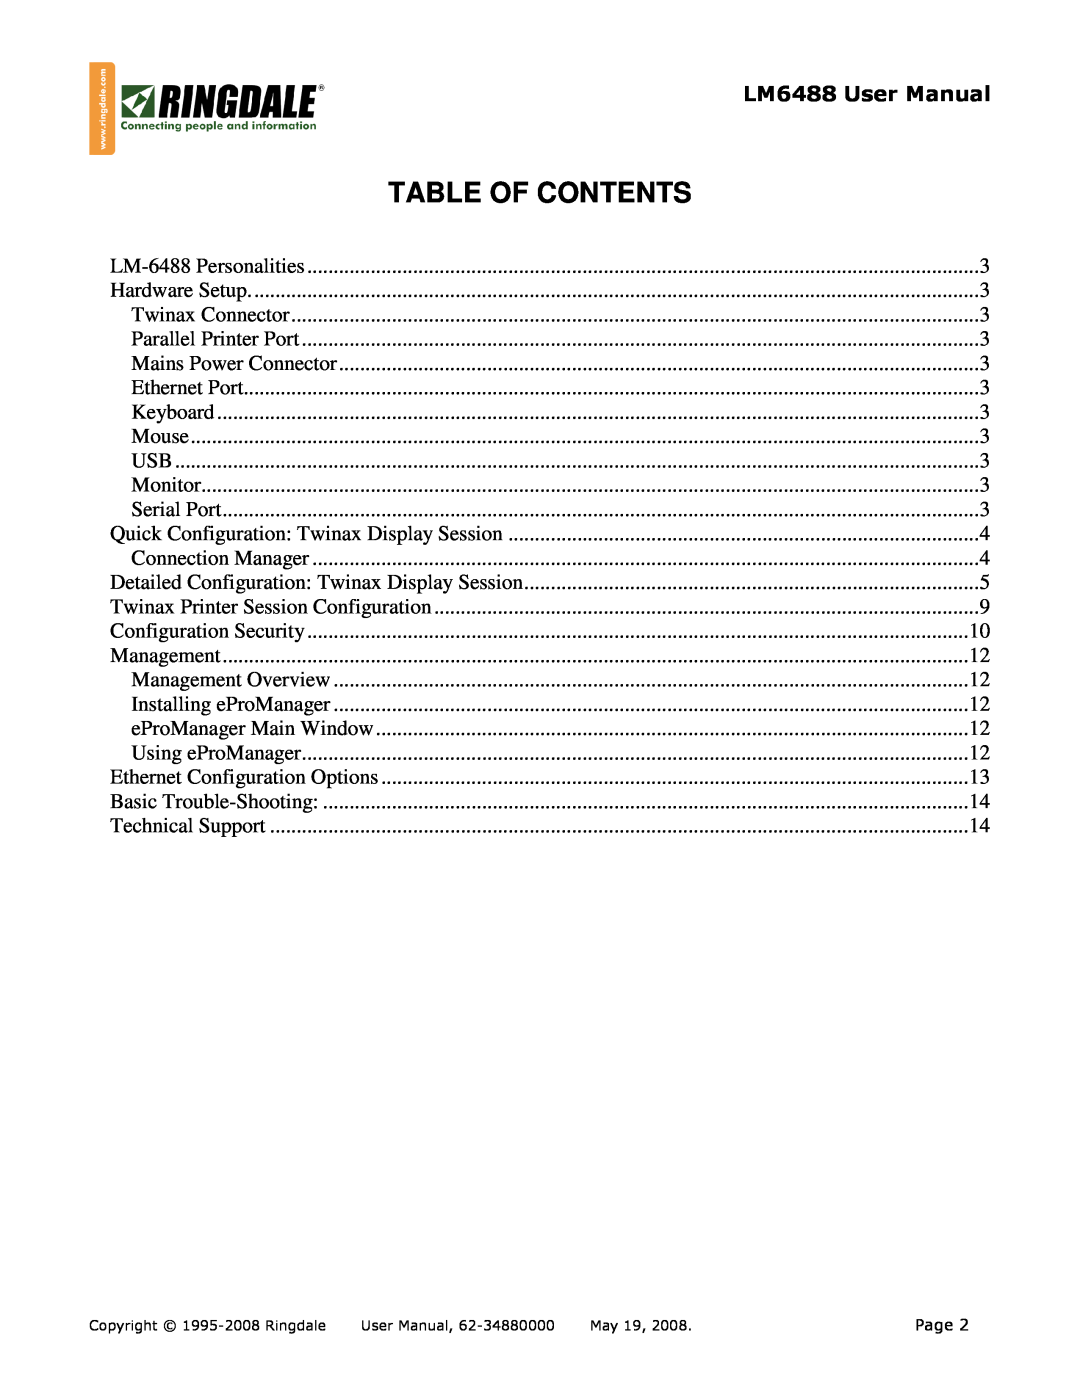 Ringdale LM-6488 Table Of Contents, LM6488 User Manual, Page, Detailed Configuration Twinax Display Session, May 19 